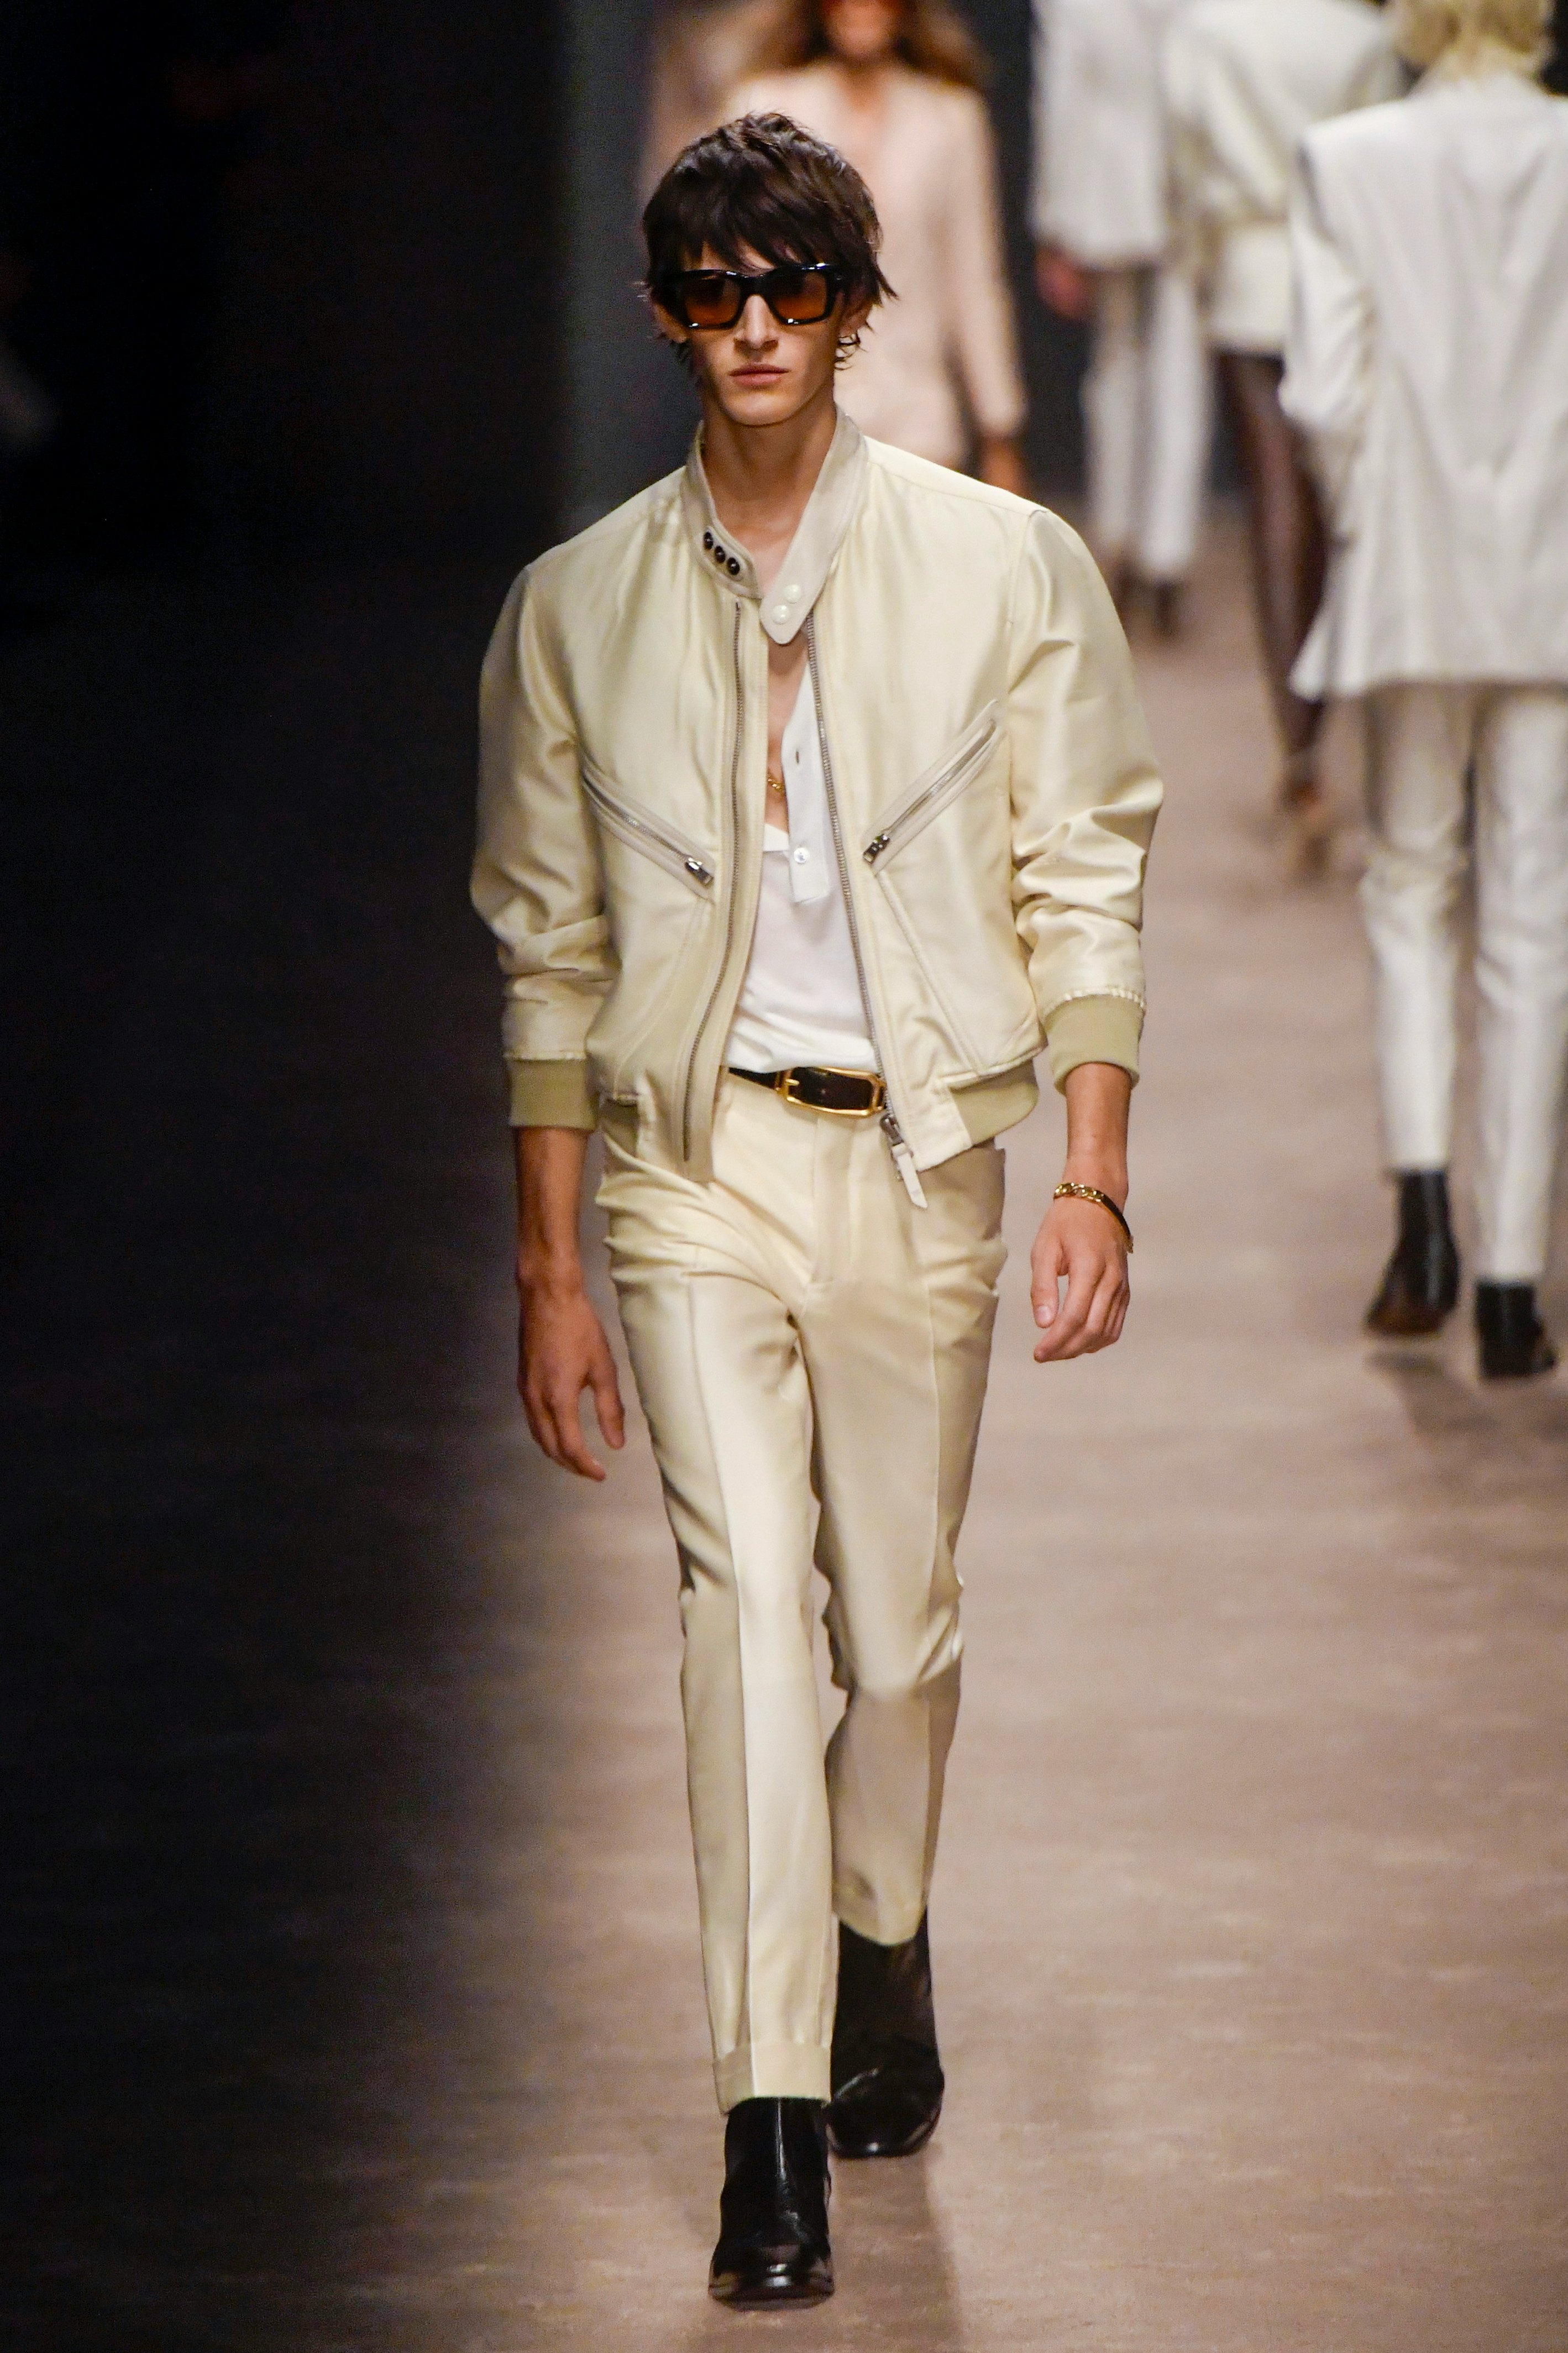 MILAN FASHION PHOTOS: Tom Ford relaunches under Peter Hawkings and